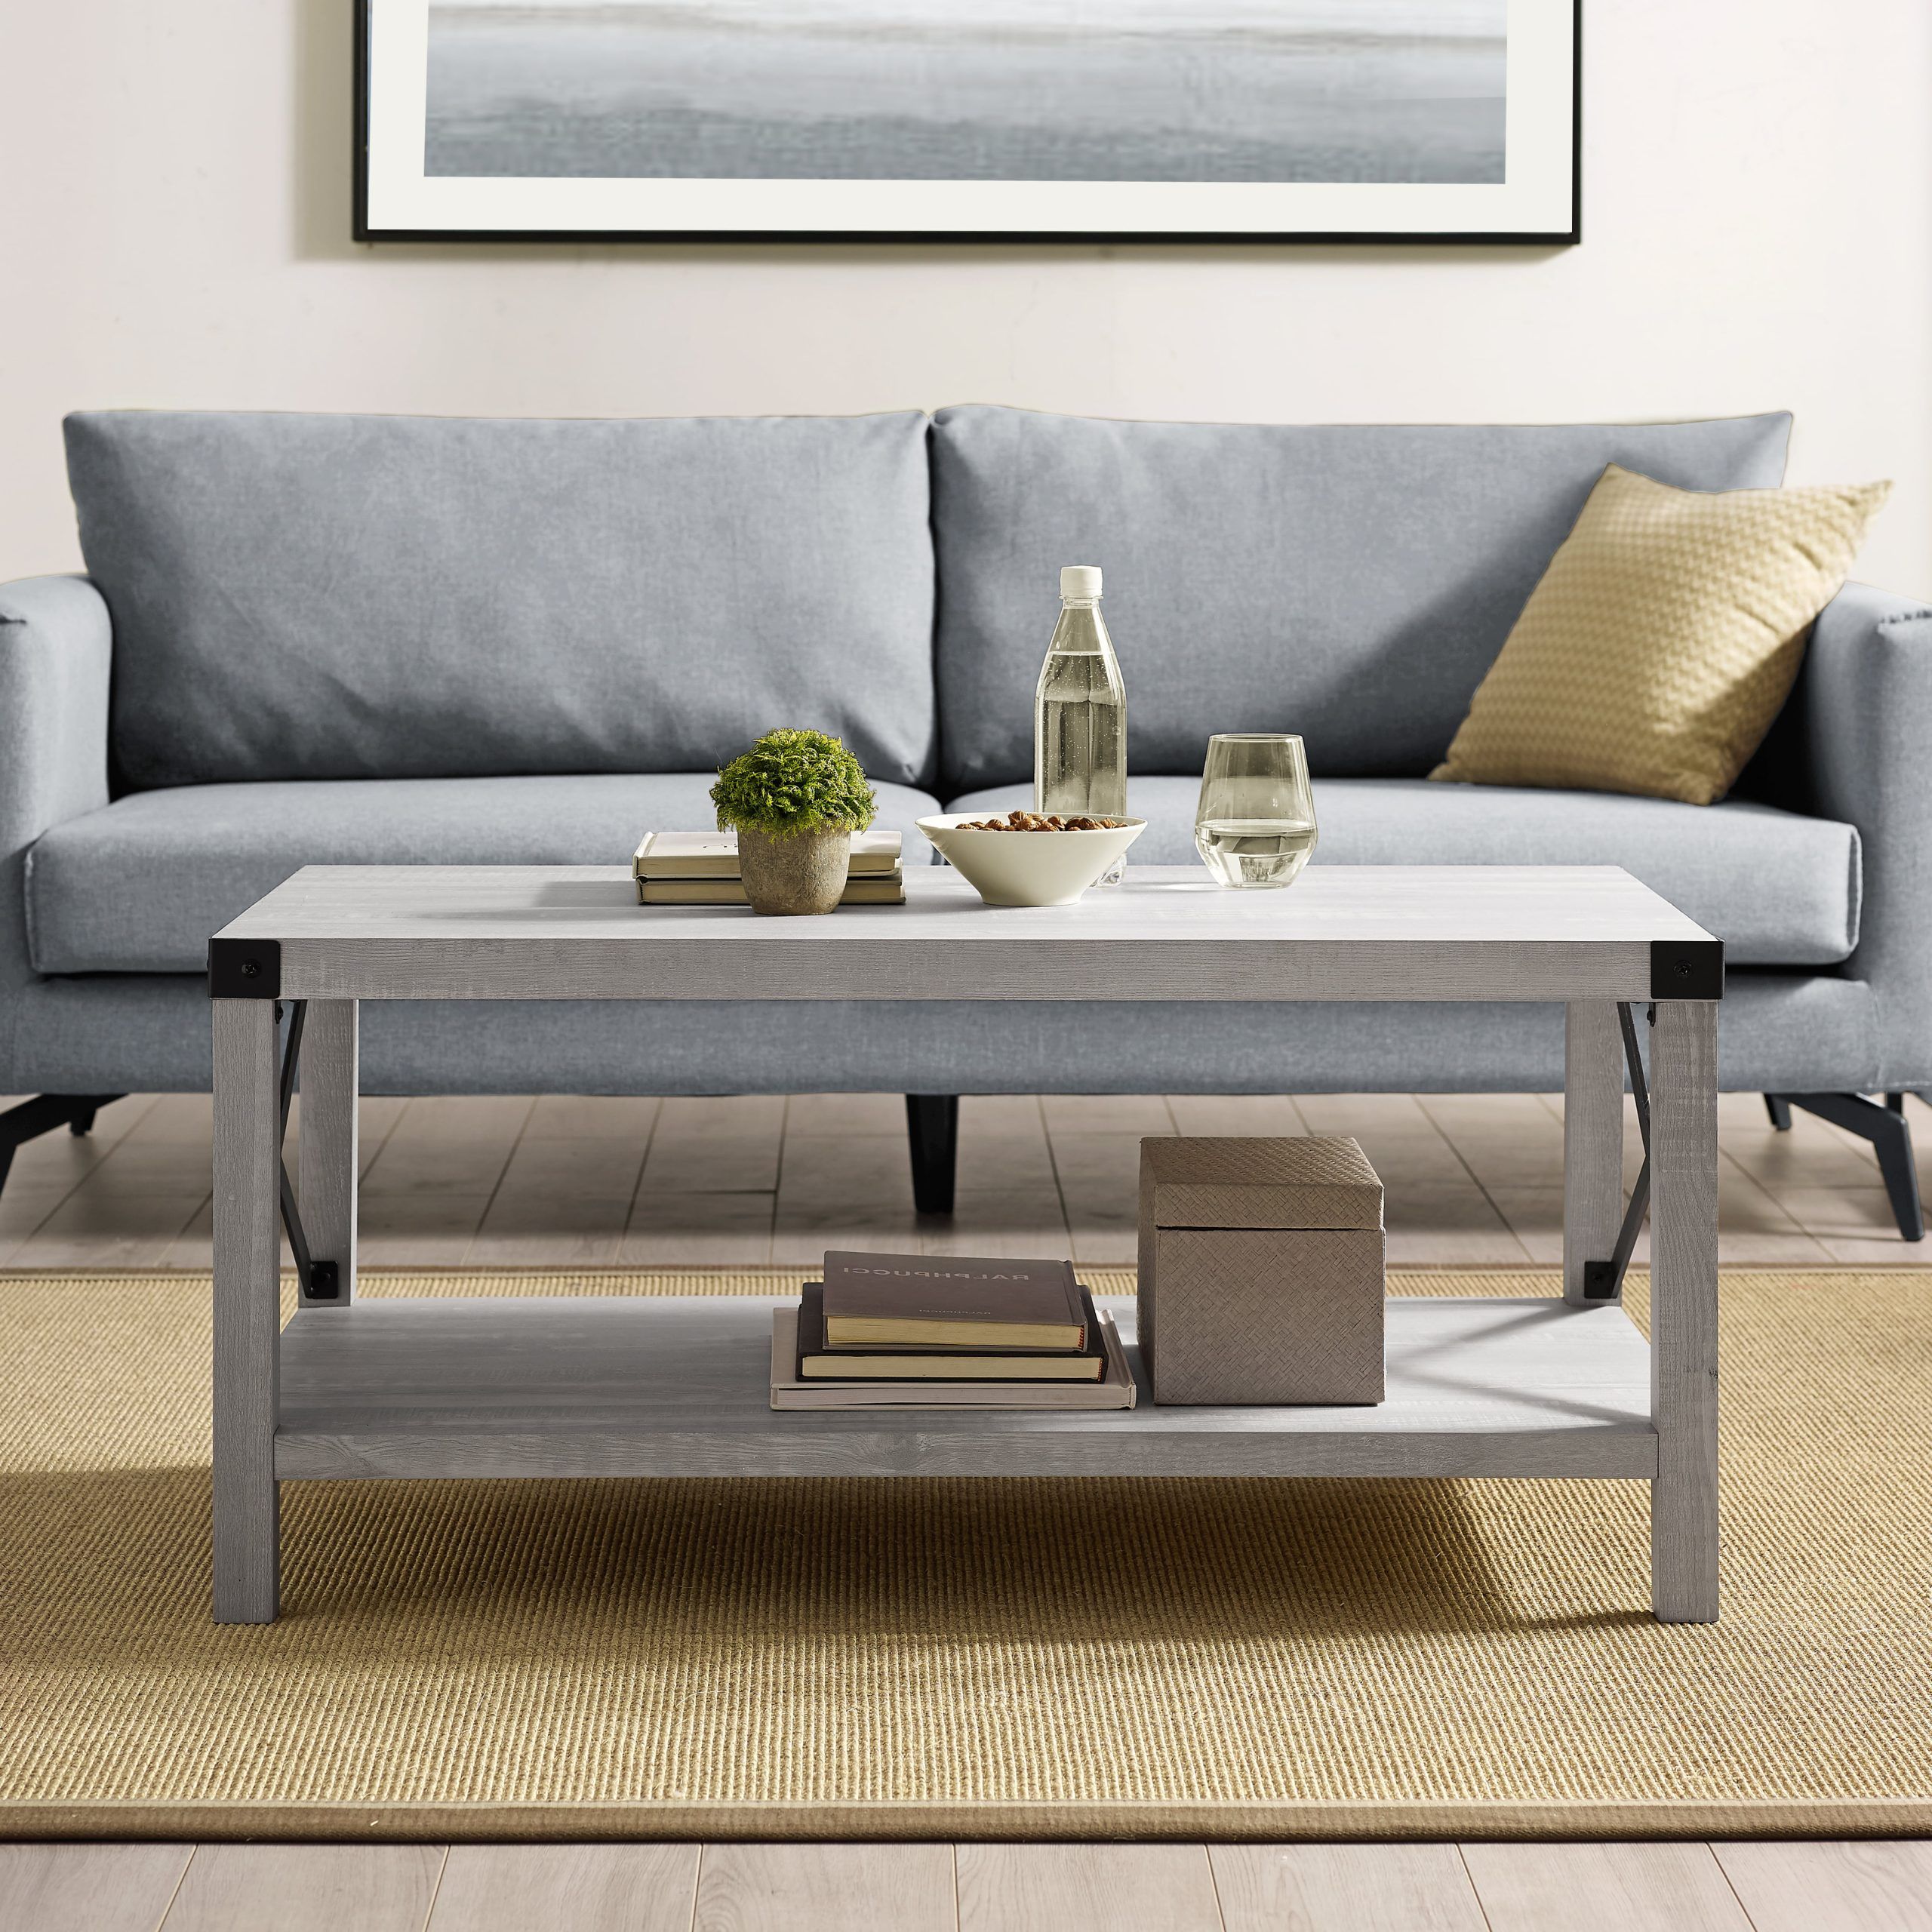 Woven Paths Magnolia Metal X Coffee Table, Stone Grey – Walmart Pertaining To Woven Paths Coffee Tables (Gallery 7 of 20)